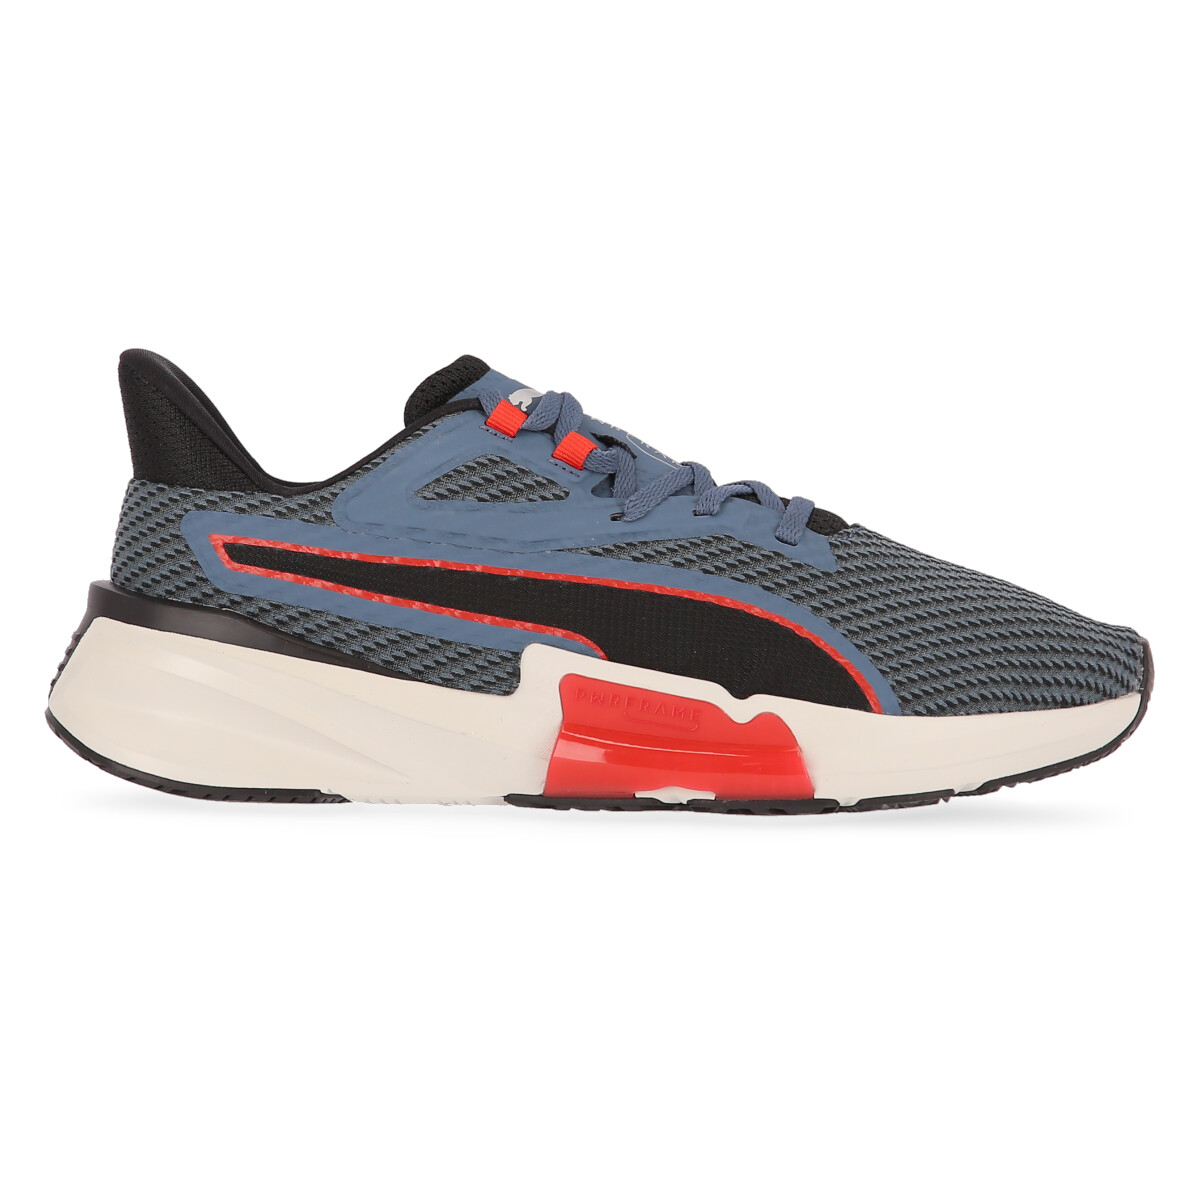 Zapatillas Puma Pwrframe,  image number null